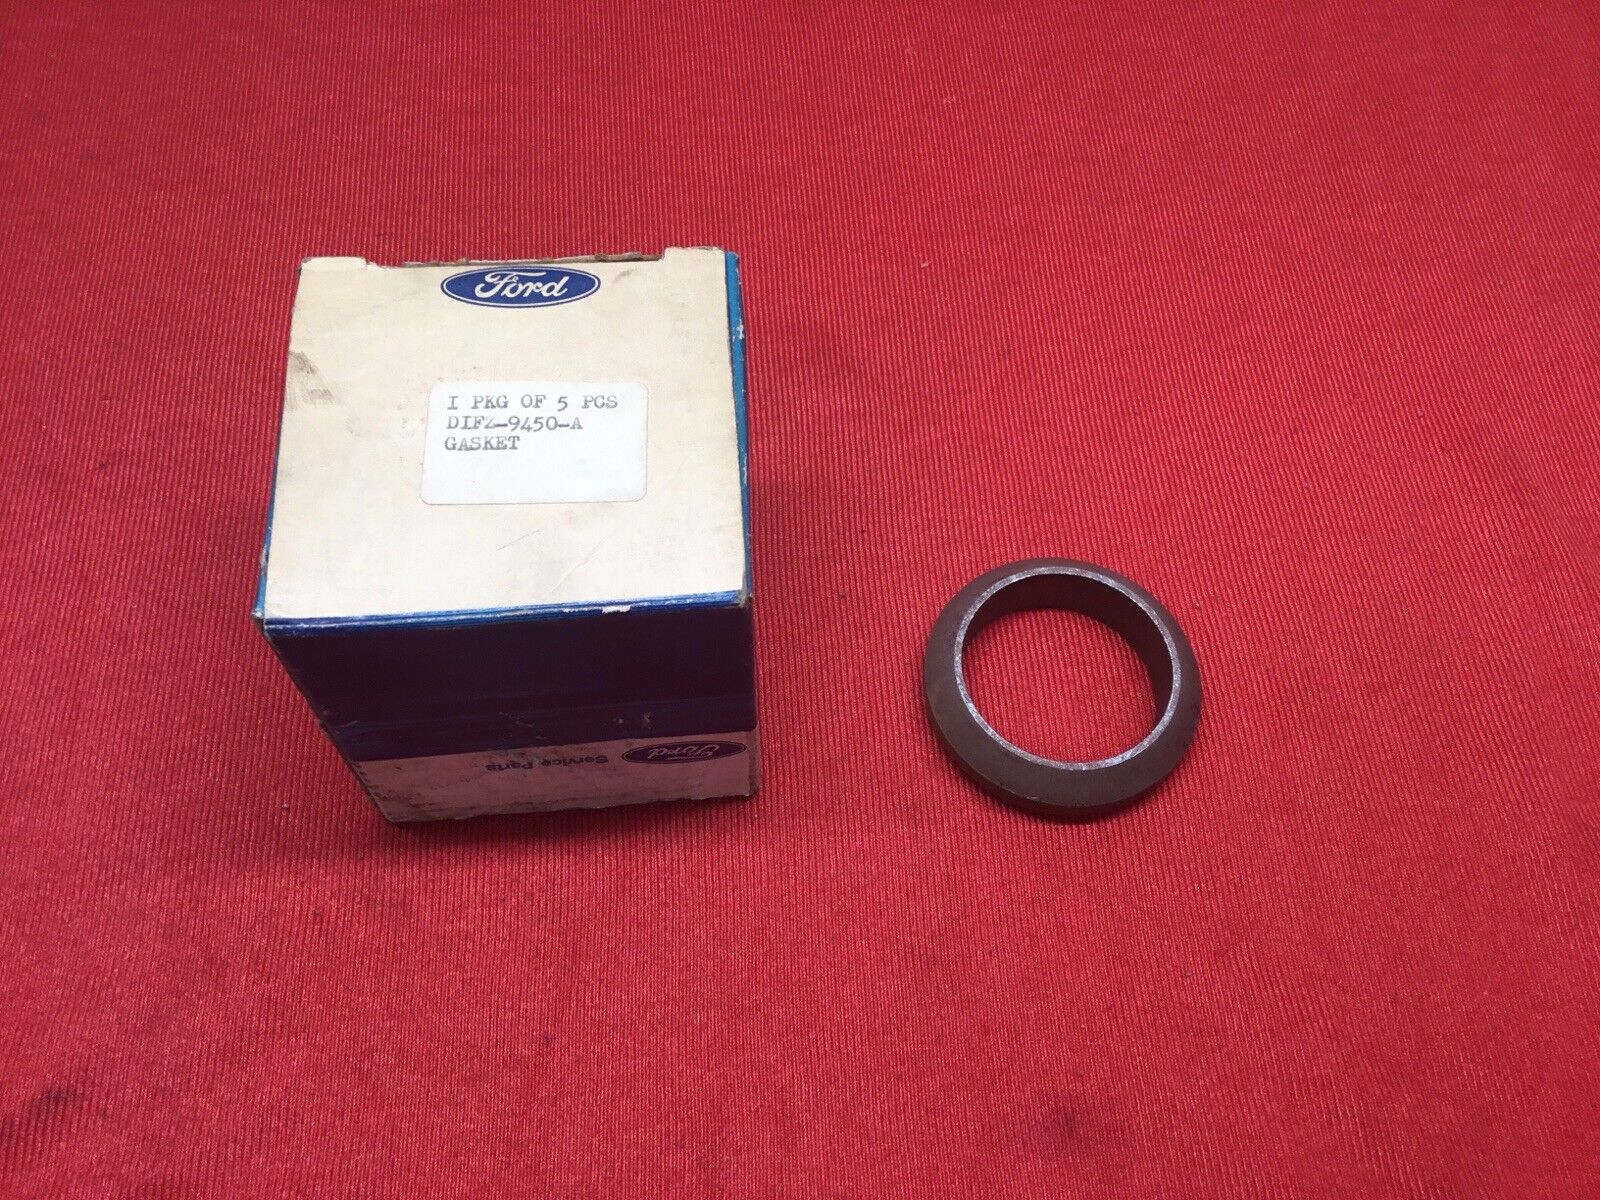 NOS FORD 1971-1974 PINTO EXHAUST MANIFOLD INLET GASKET D1FZ-9450-A 